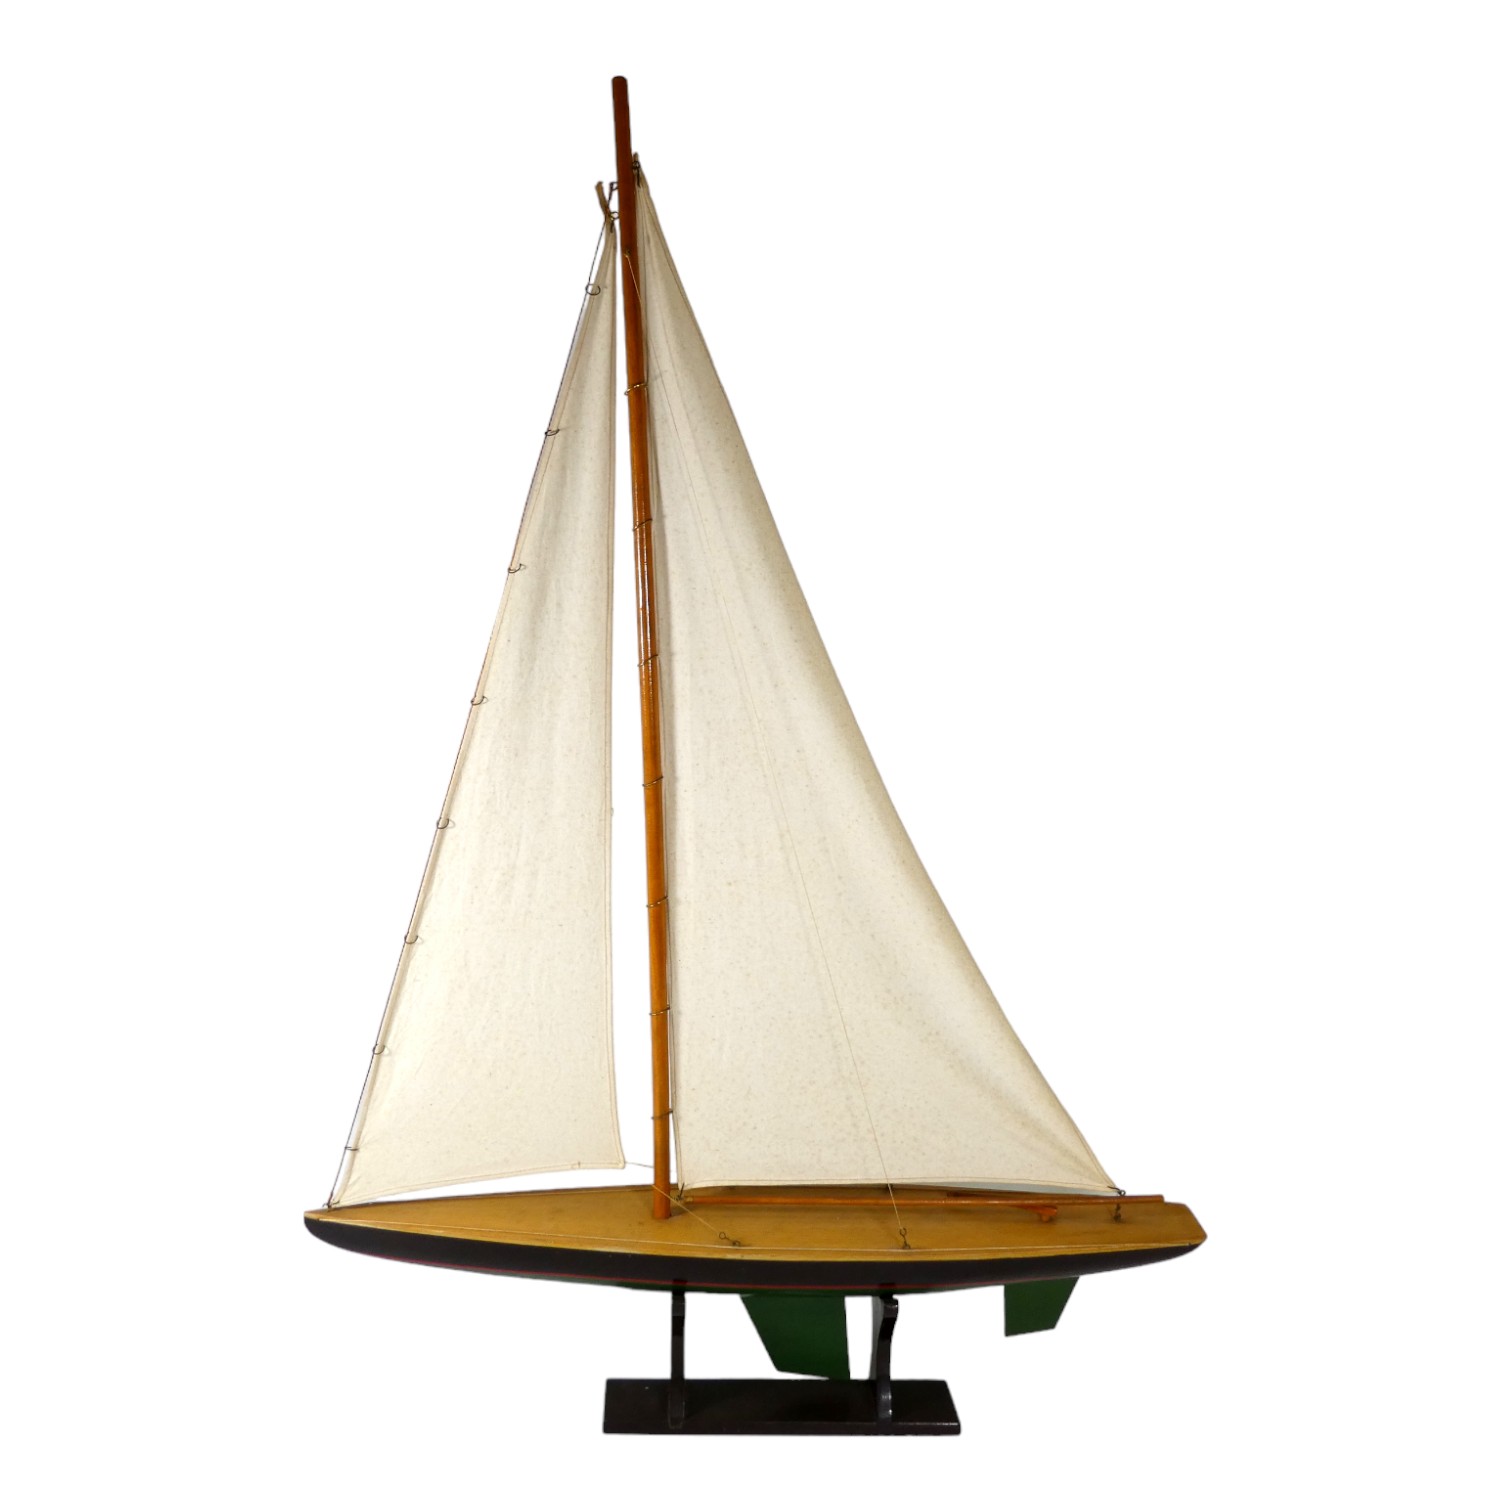 A 20th century pond yacht - Bermuda rig, with black hull, red boot line and green hull, height